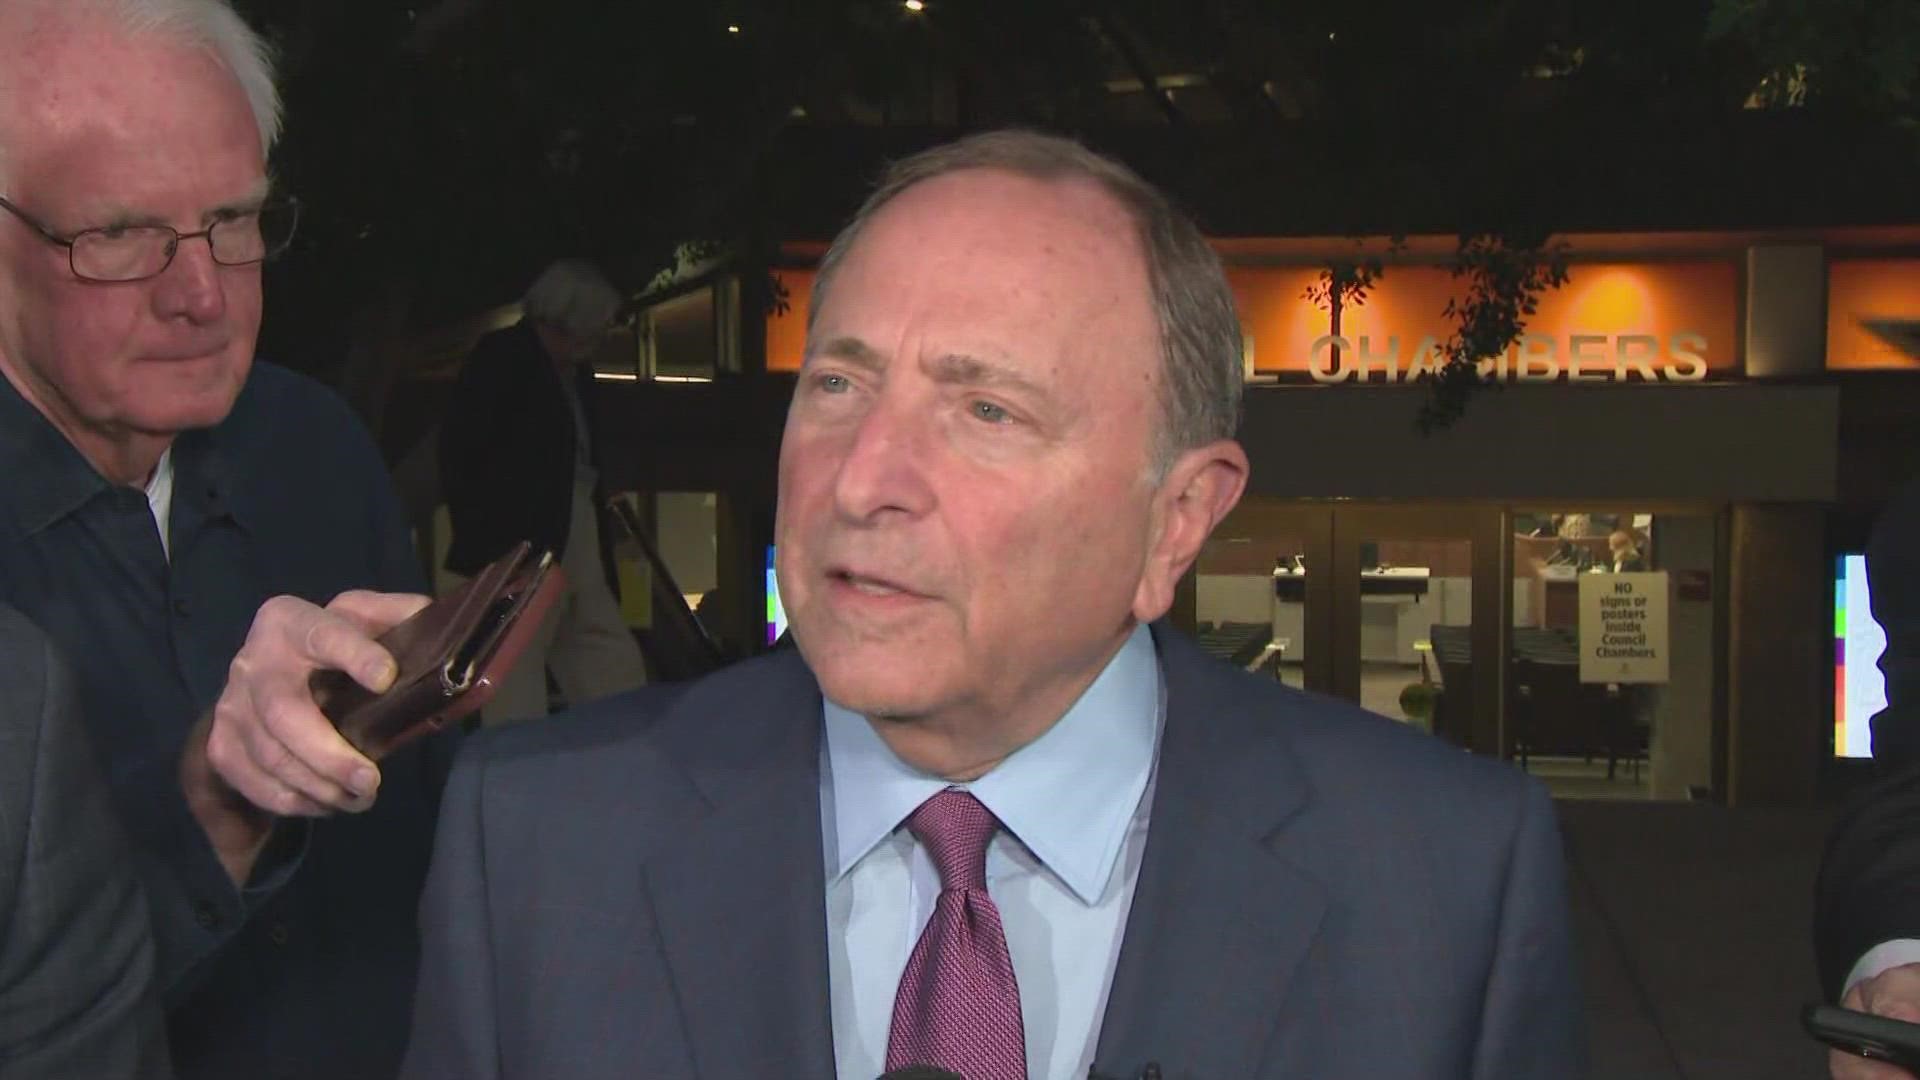 12 Sports hears from NHL Commissioner Gary Bettman about his support for the potential home of the Arizona Coyotes.